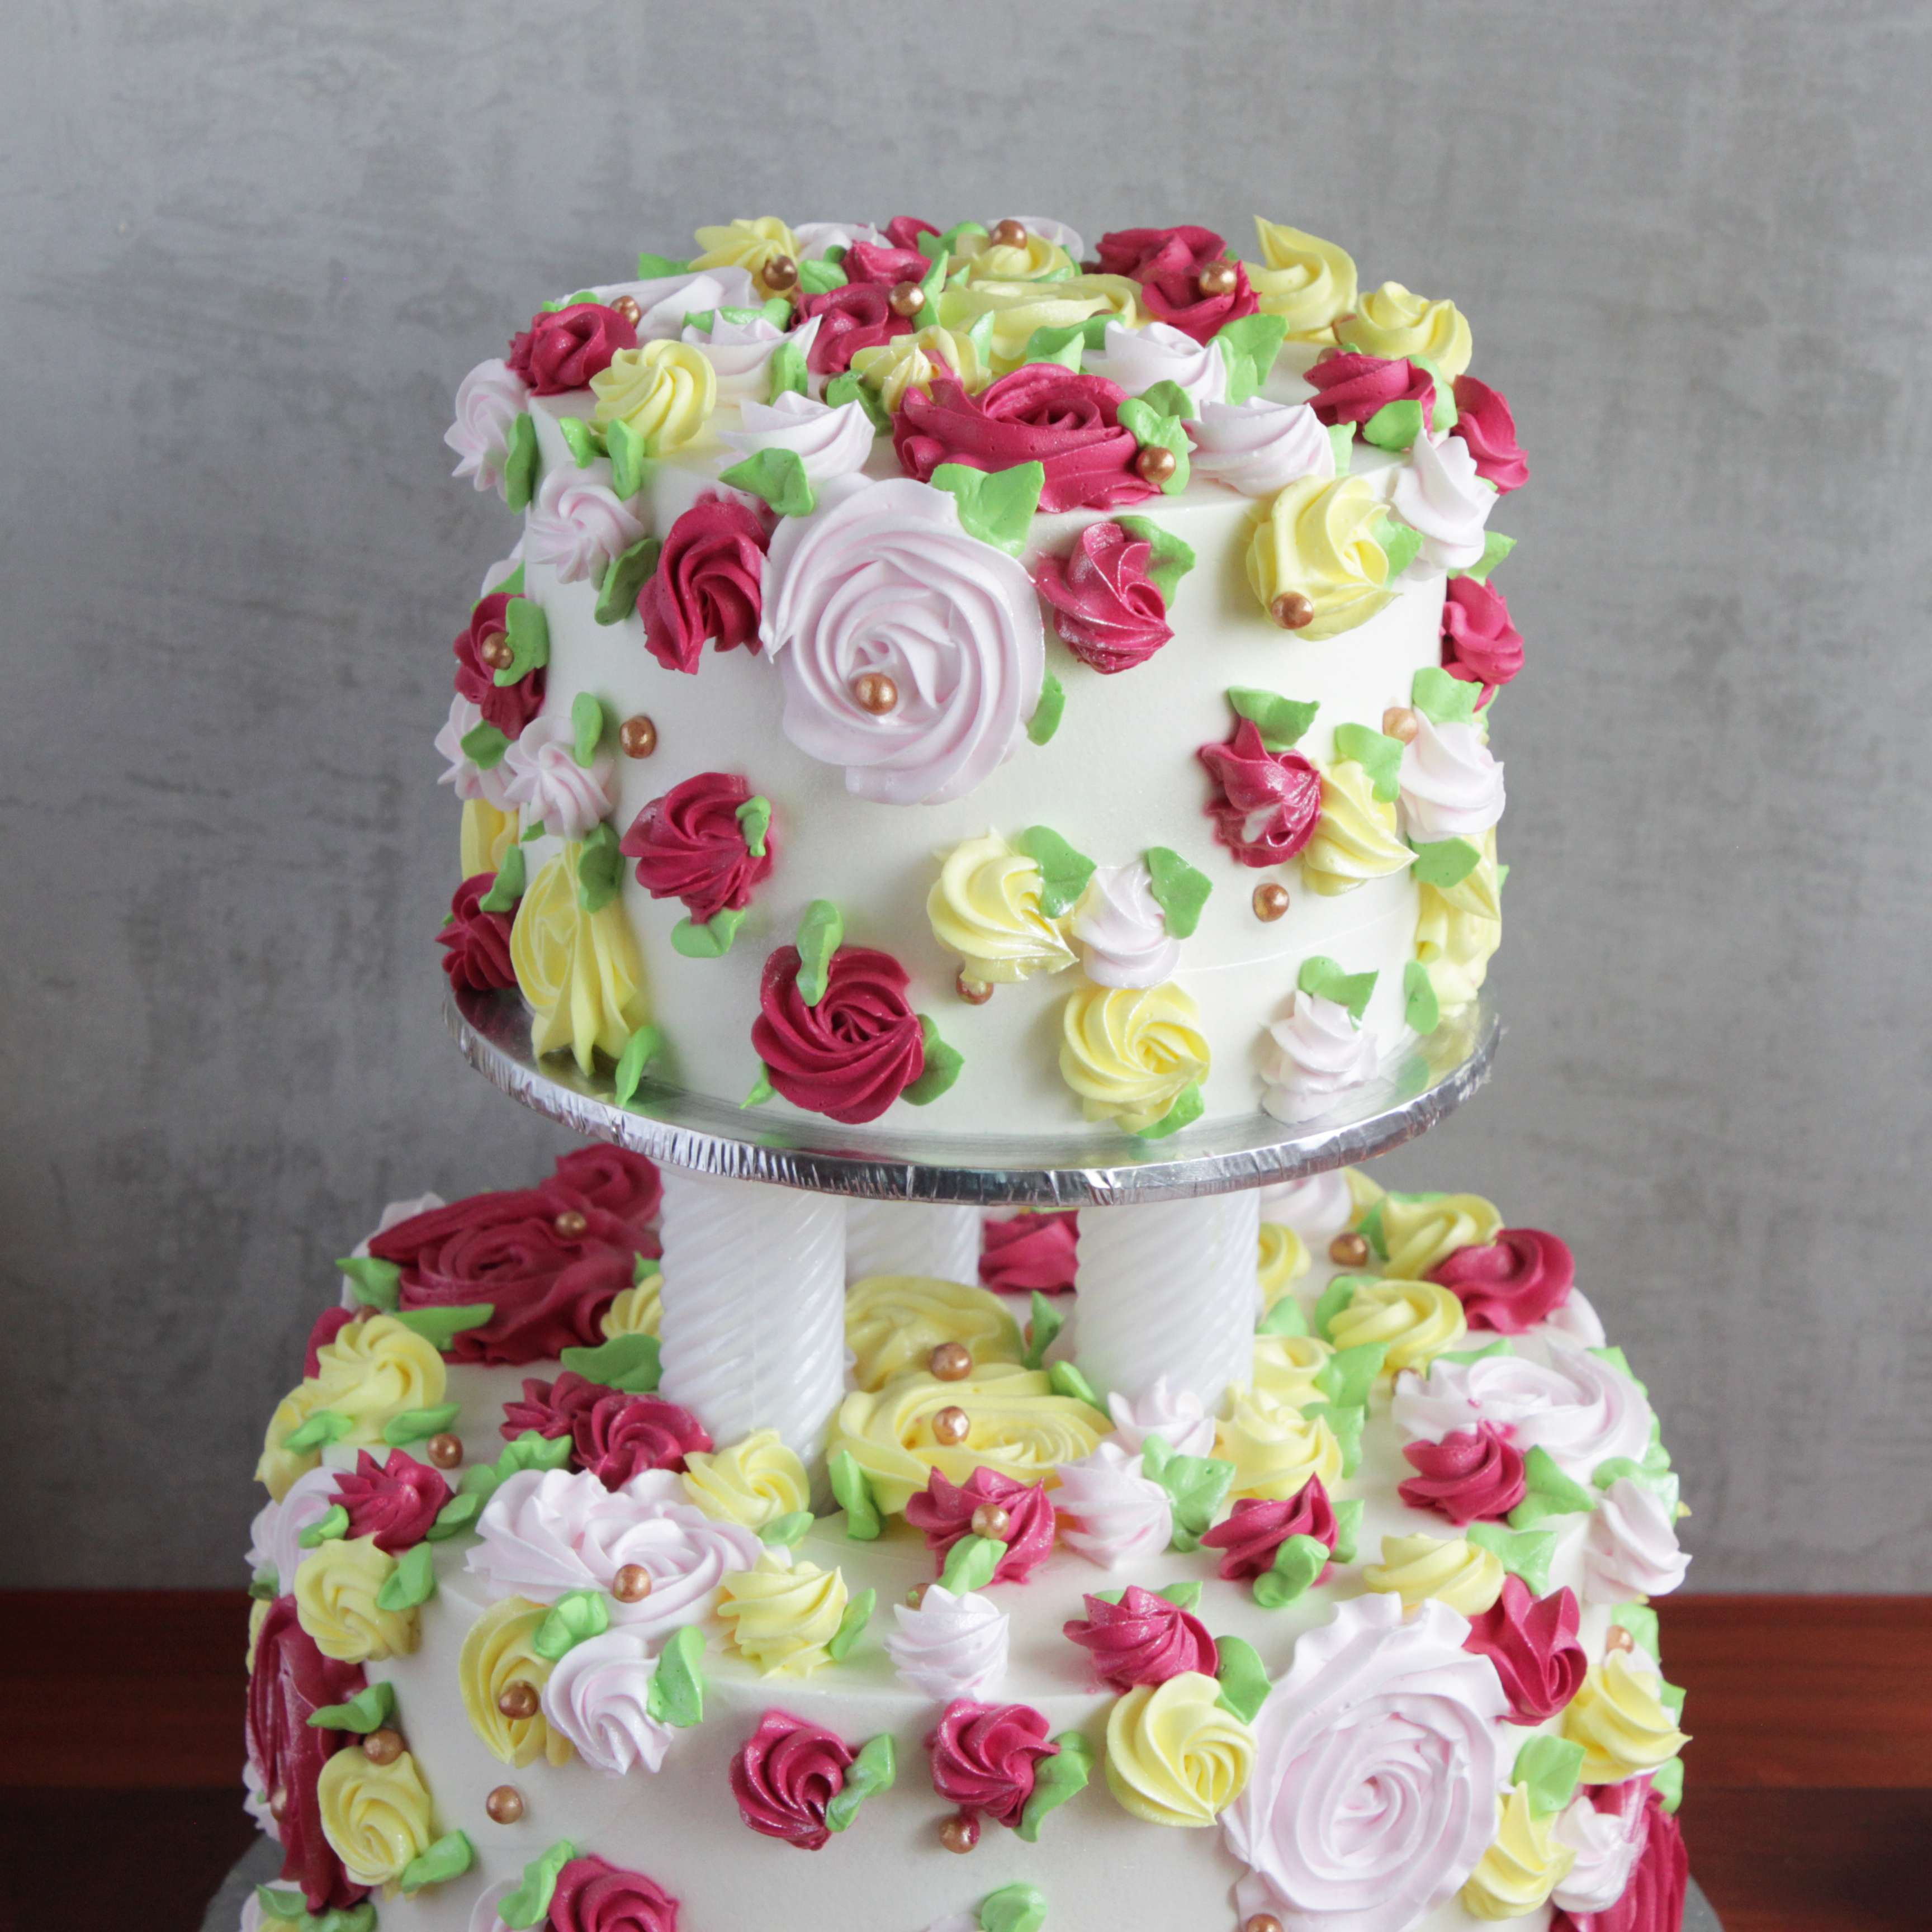 Floral Birthday Cake Upgraded Classy Flowers Florist In Tinley Park,IL  Florist | Flower Delivery Tinely Park, IL 60477